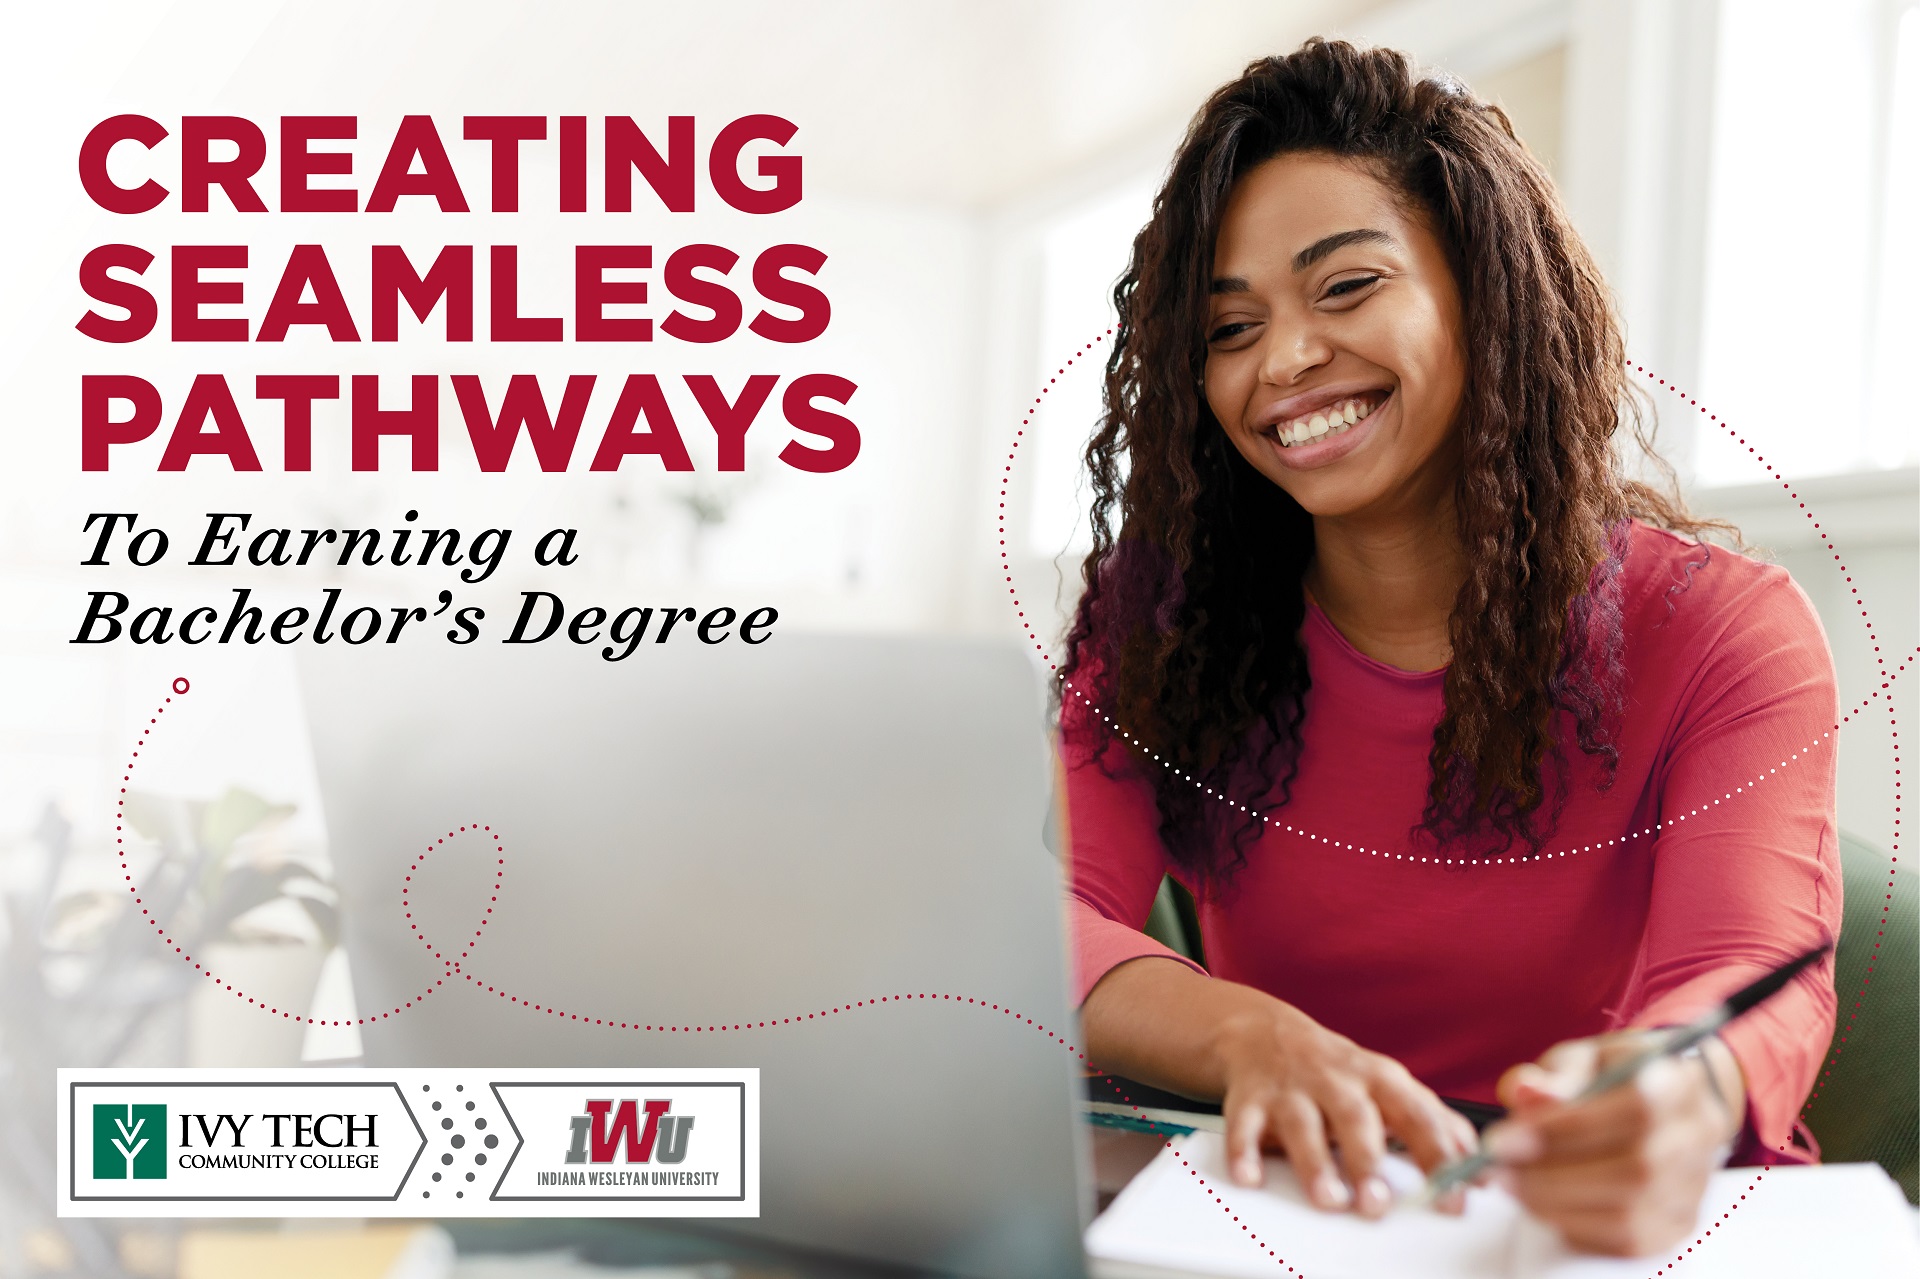 Creating Seamless Pathways to Earning a Bachelor's Degree